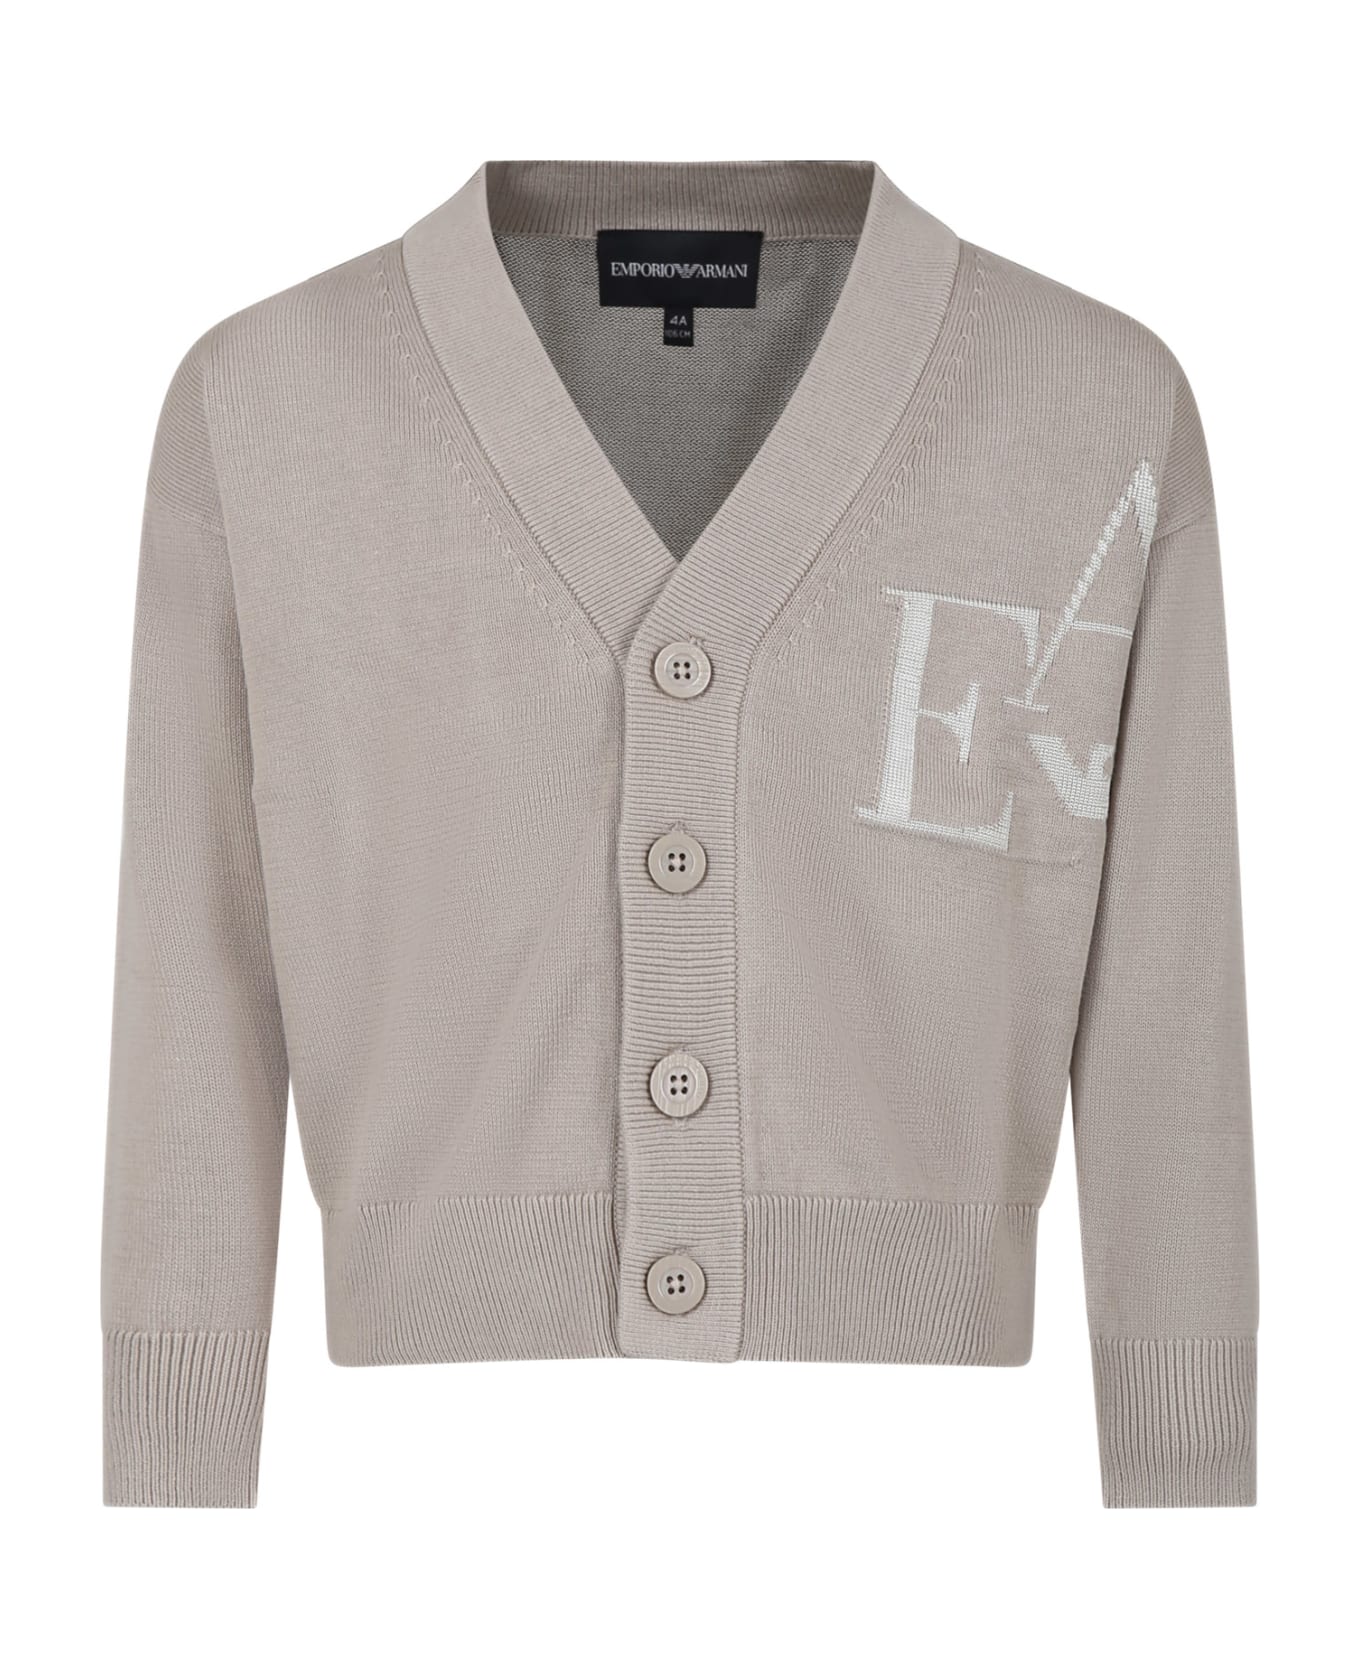 Emporio Armani Beige Cardigan For Boy With Embroidered Logo - Beige